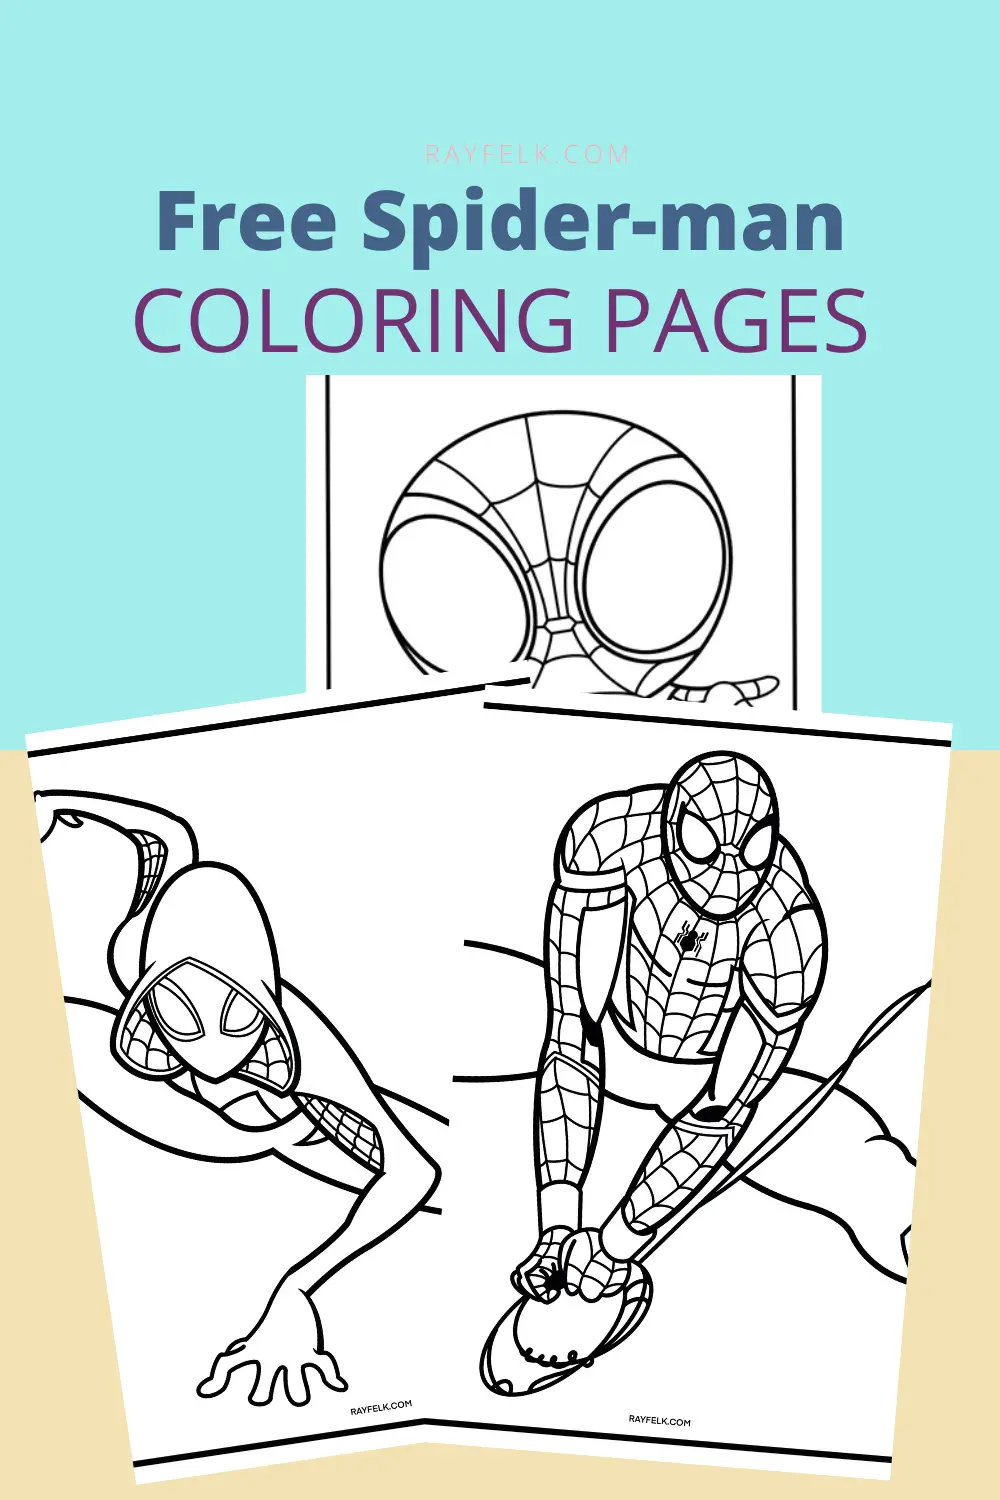 spiderman coloring pages, rayfelk